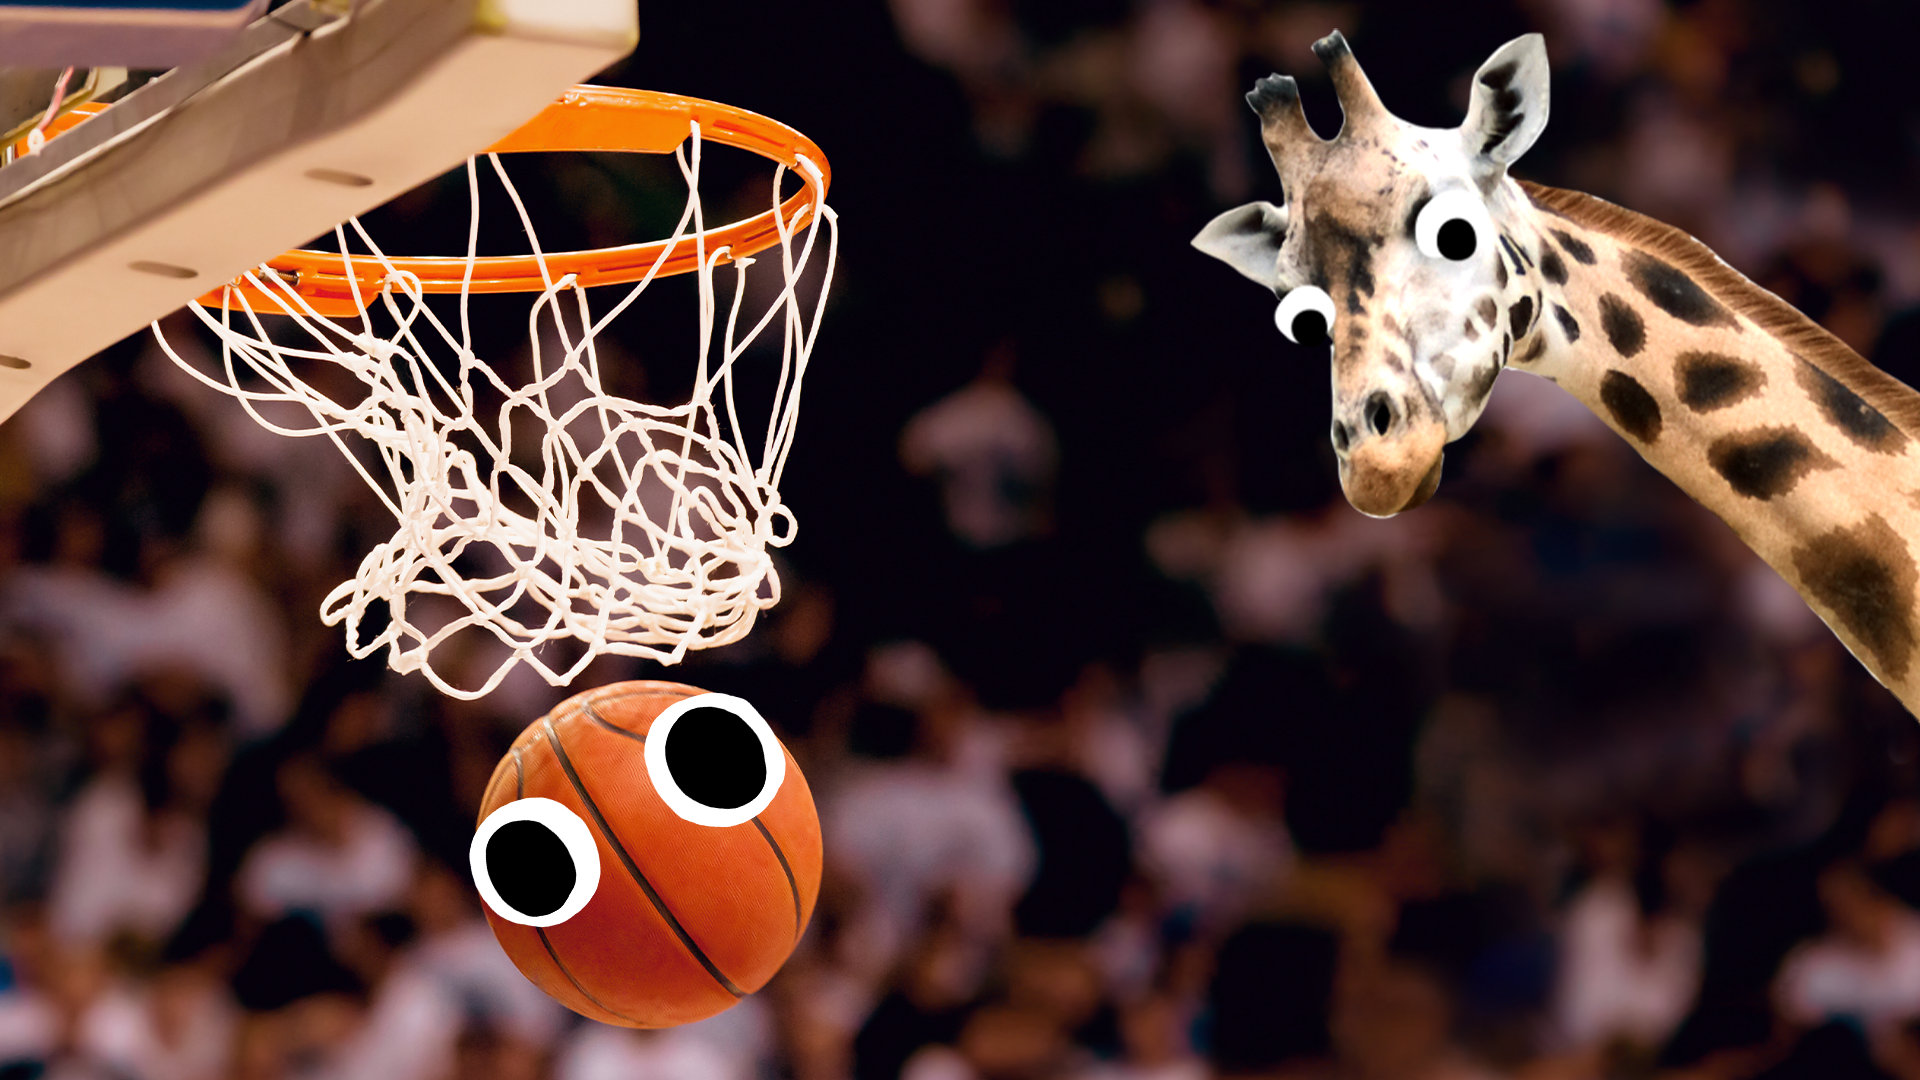 Basketball with eyes in hoop and derpy giraffe